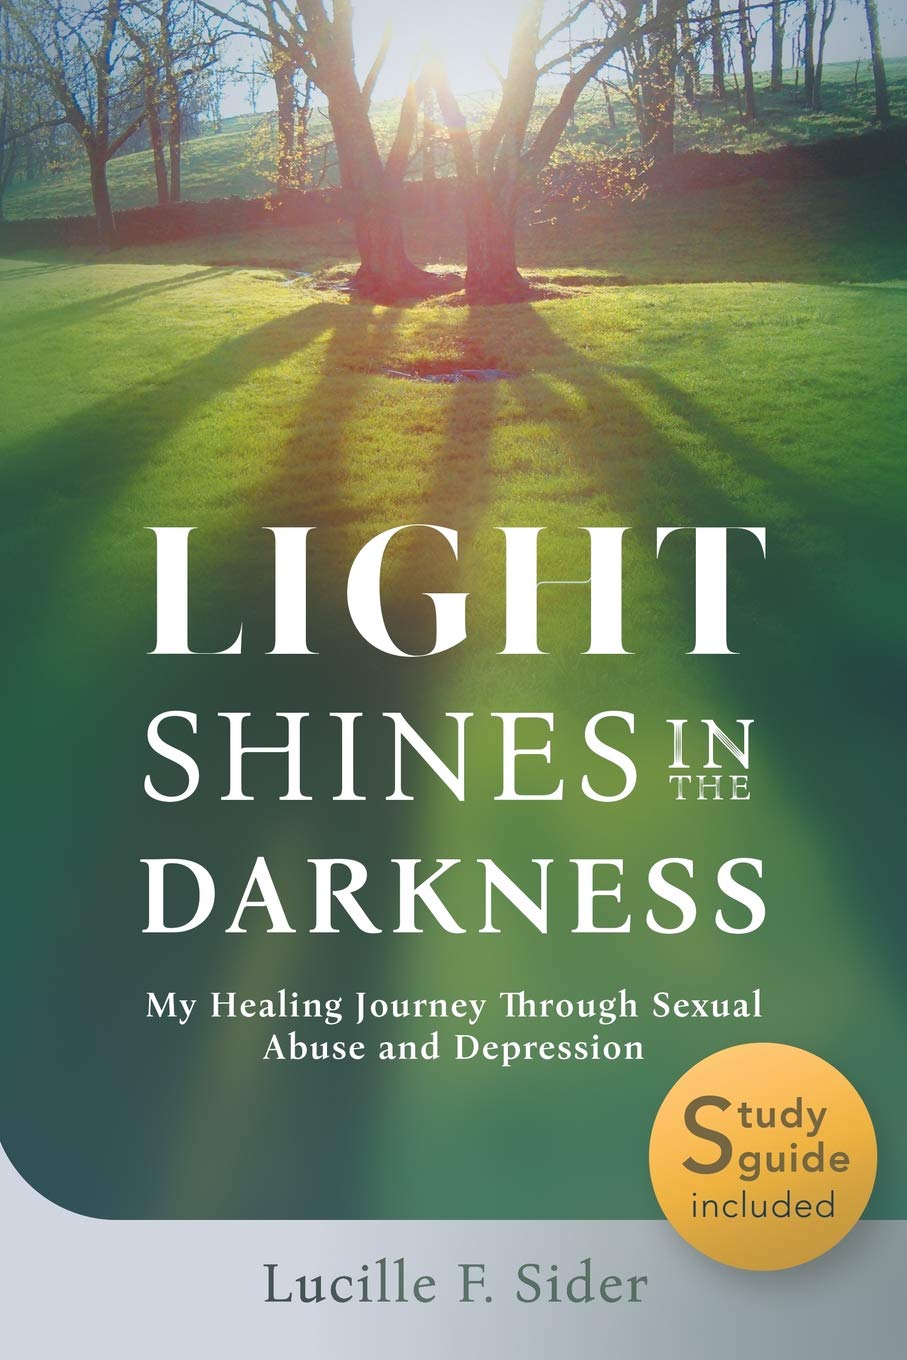 ‘Light Shines in the Darkness’ by Lucille Sider book cover